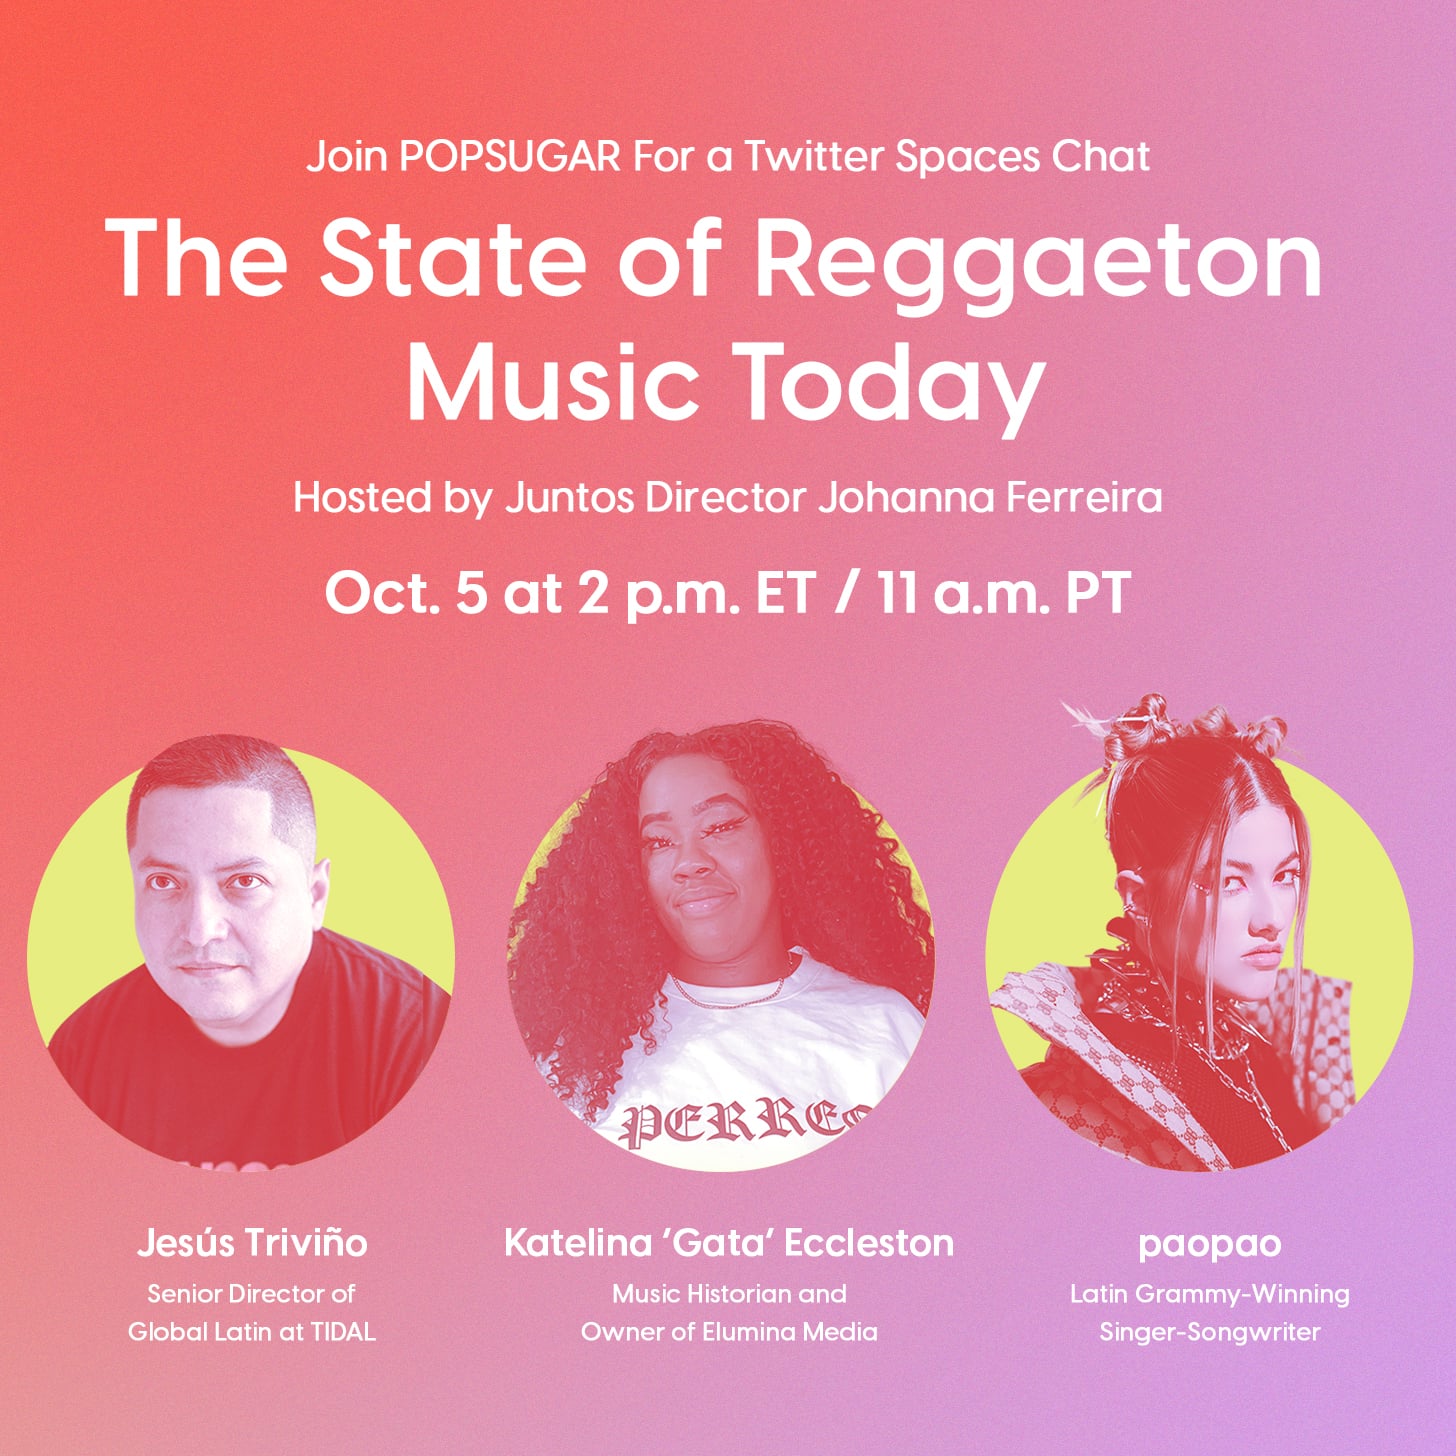 The State of Reggaeton Music Today – in Conversation With Paopao, Katelina Eccleston, and Jesús Triviño